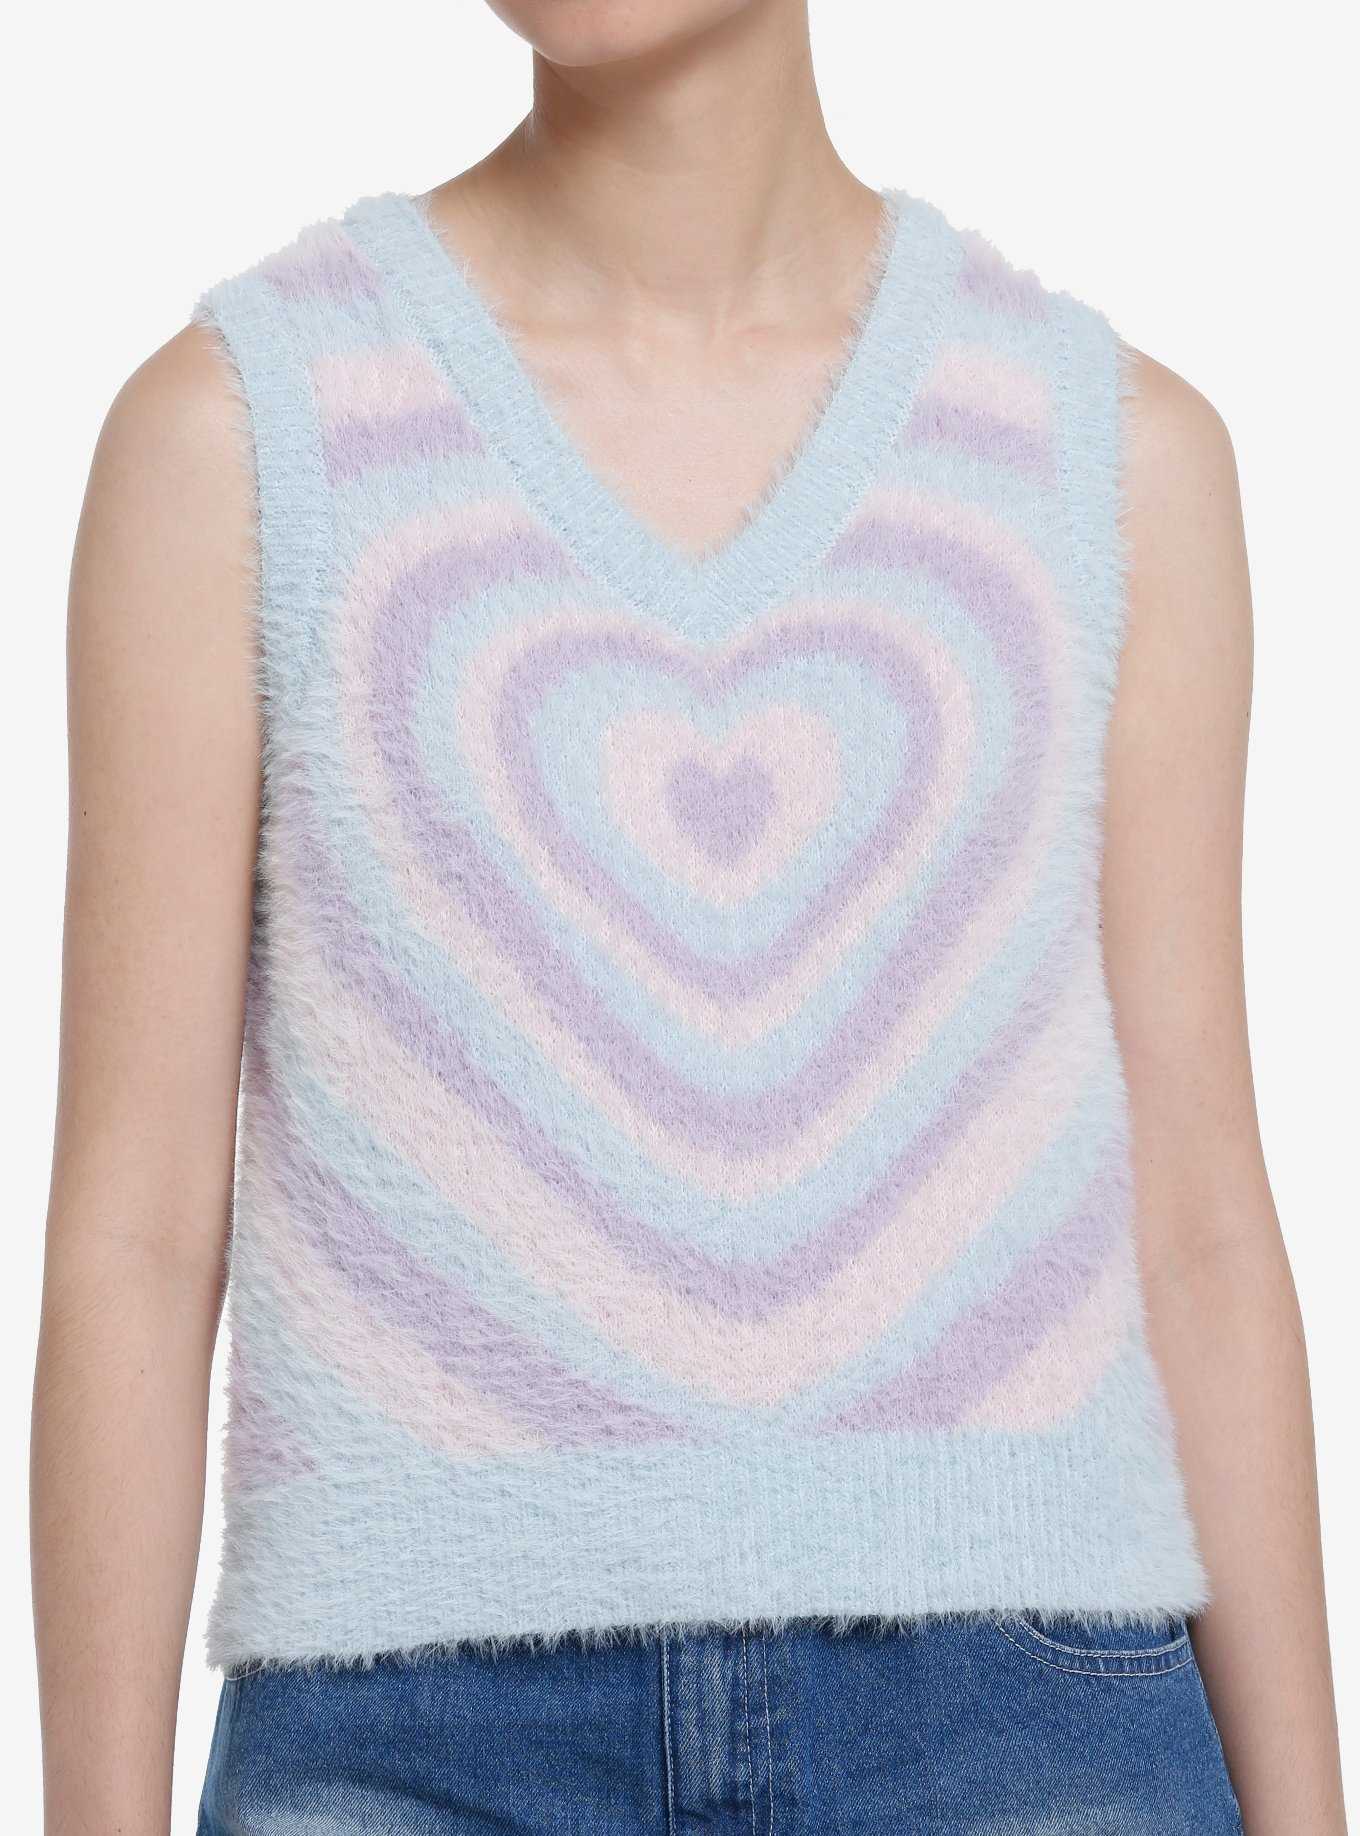 Sweet Society Pastel Hearts Fuzzy Girls Sweater Vest, , hi-res